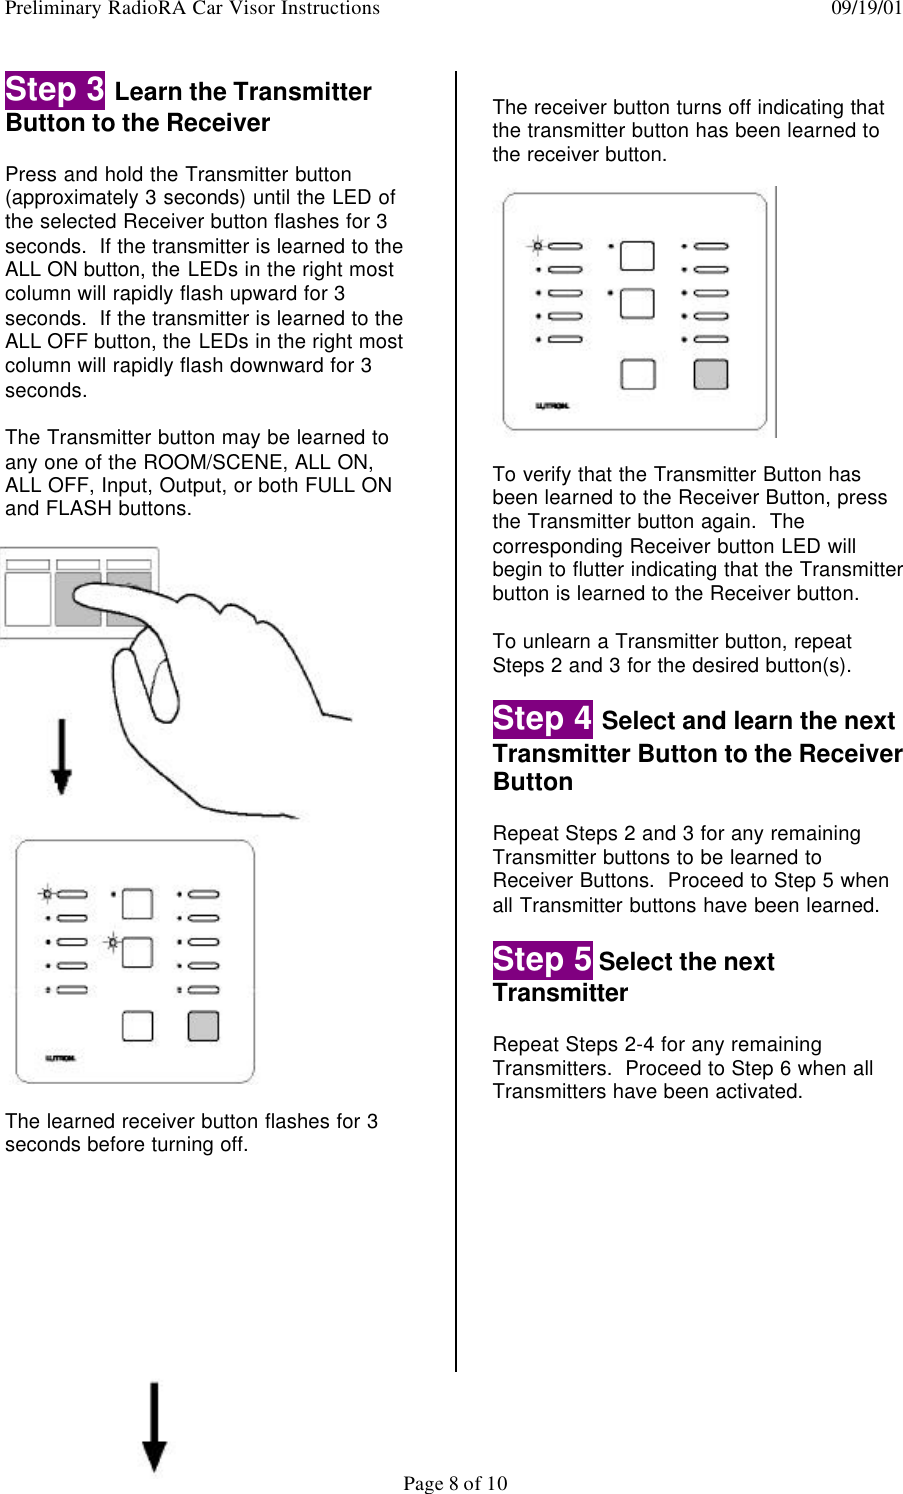 Preliminary RadioRA Car Visor Instructions  09/19/01Page 8 of 10Step 3 Learn the TransmitterButton to the ReceiverPress and hold the Transmitter button(approximately 3 seconds) until the LED ofthe selected Receiver button flashes for 3seconds.  If the transmitter is learned to theALL ON button, the LEDs in the right mostcolumn will rapidly flash upward for 3seconds.  If the transmitter is learned to theALL OFF button, the LEDs in the right mostcolumn will rapidly flash downward for 3seconds.The Transmitter button may be learned toany one of the ROOM/SCENE, ALL ON,ALL OFF, Input, Output, or both FULL ONand FLASH buttons.The learned receiver button flashes for 3seconds before turning off.The receiver button turns off indicating thatthe transmitter button has been learned tothe receiver button.To verify that the Transmitter Button hasbeen learned to the Receiver Button, pressthe Transmitter button again.  Thecorresponding Receiver button LED willbegin to flutter indicating that the Transmitterbutton is learned to the Receiver button.To unlearn a Transmitter button, repeatSteps 2 and 3 for the desired button(s).Step 4 Select and learn the nextTransmitter Button to the ReceiverButtonRepeat Steps 2 and 3 for any remainingTransmitter buttons to be learned toReceiver Buttons.  Proceed to Step 5 whenall Transmitter buttons have been learned.Step 5 Select the nextTransmitterRepeat Steps 2-4 for any remainingTransmitters.  Proceed to Step 6 when allTransmitters have been activated.